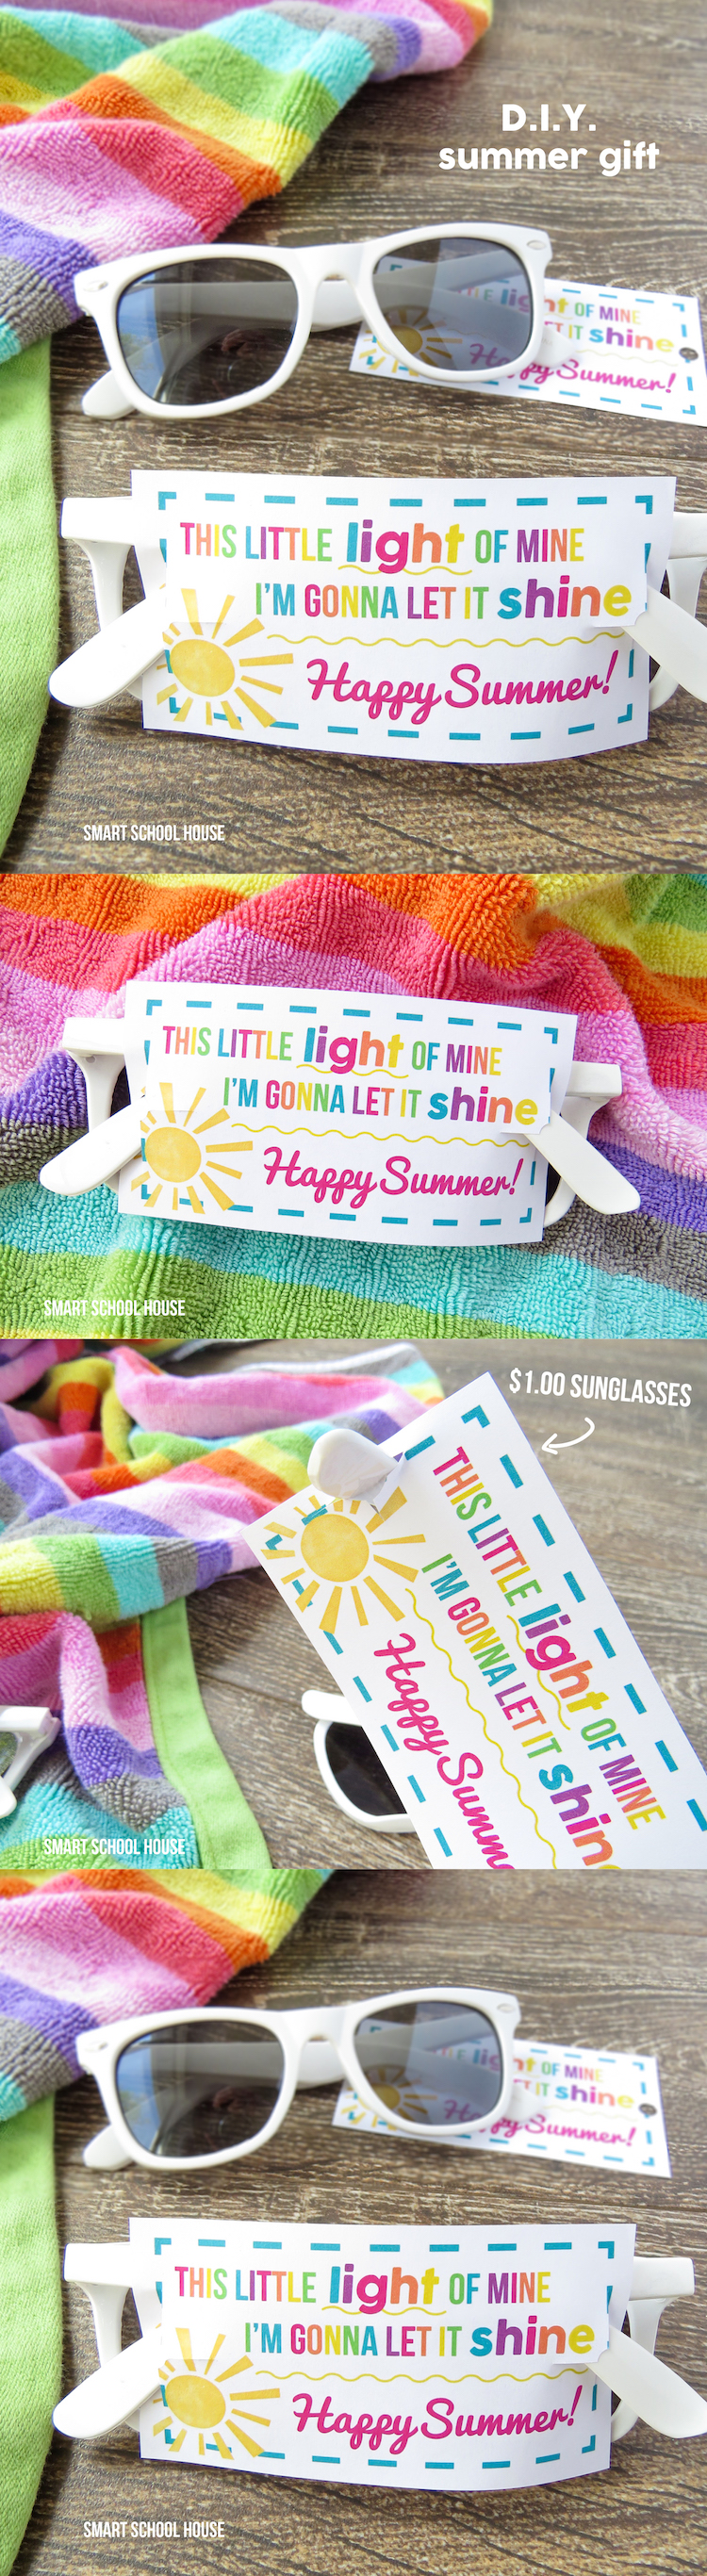 This Little Light of Mine Sunglasses Printable. A $1 end of year idea, DIY summer gift, or even an end of year teacher gift!